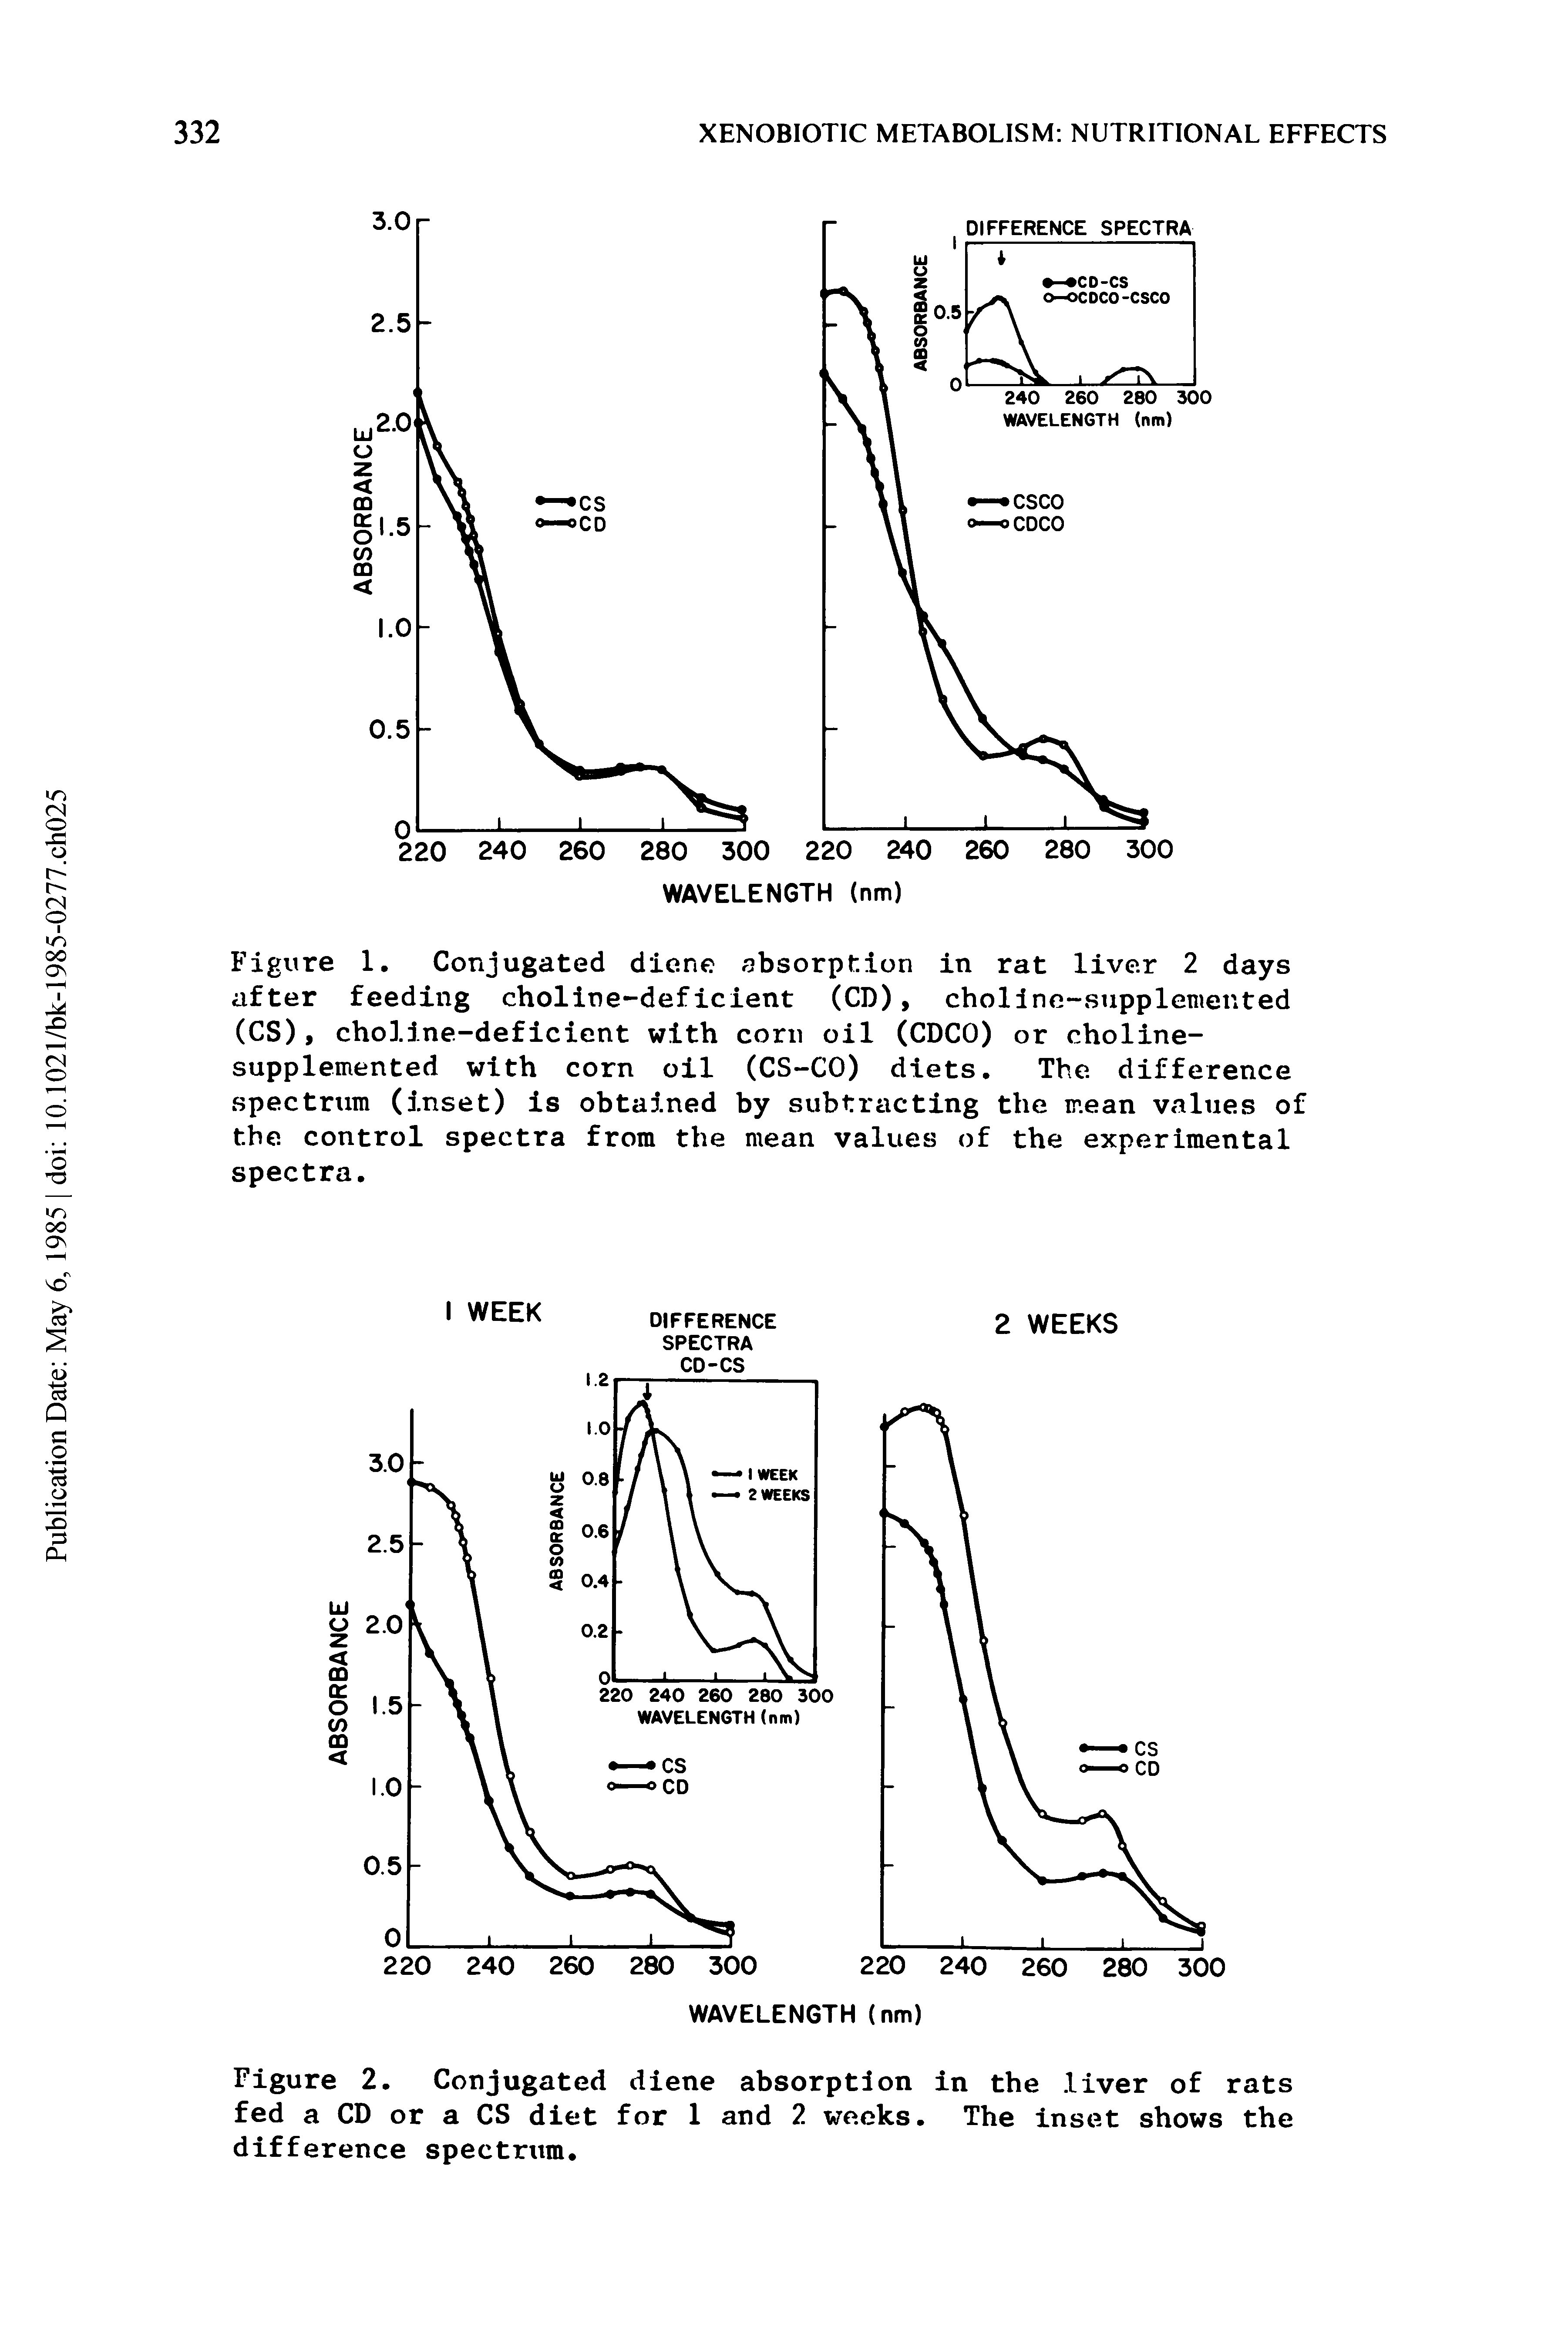 Figure 1. Conjugated diene absorption in rat liver 2 days after feeding choline-deficient (CD), choline-supplemented (CS), choline-deficient with corn oil (CDCO) or choline-supplemented with corn oil (CS-CO) diets. The. difference spectrum (inset) is obtained by subtracting the mean values of the control spectra from the mean values of the experimental spectra.